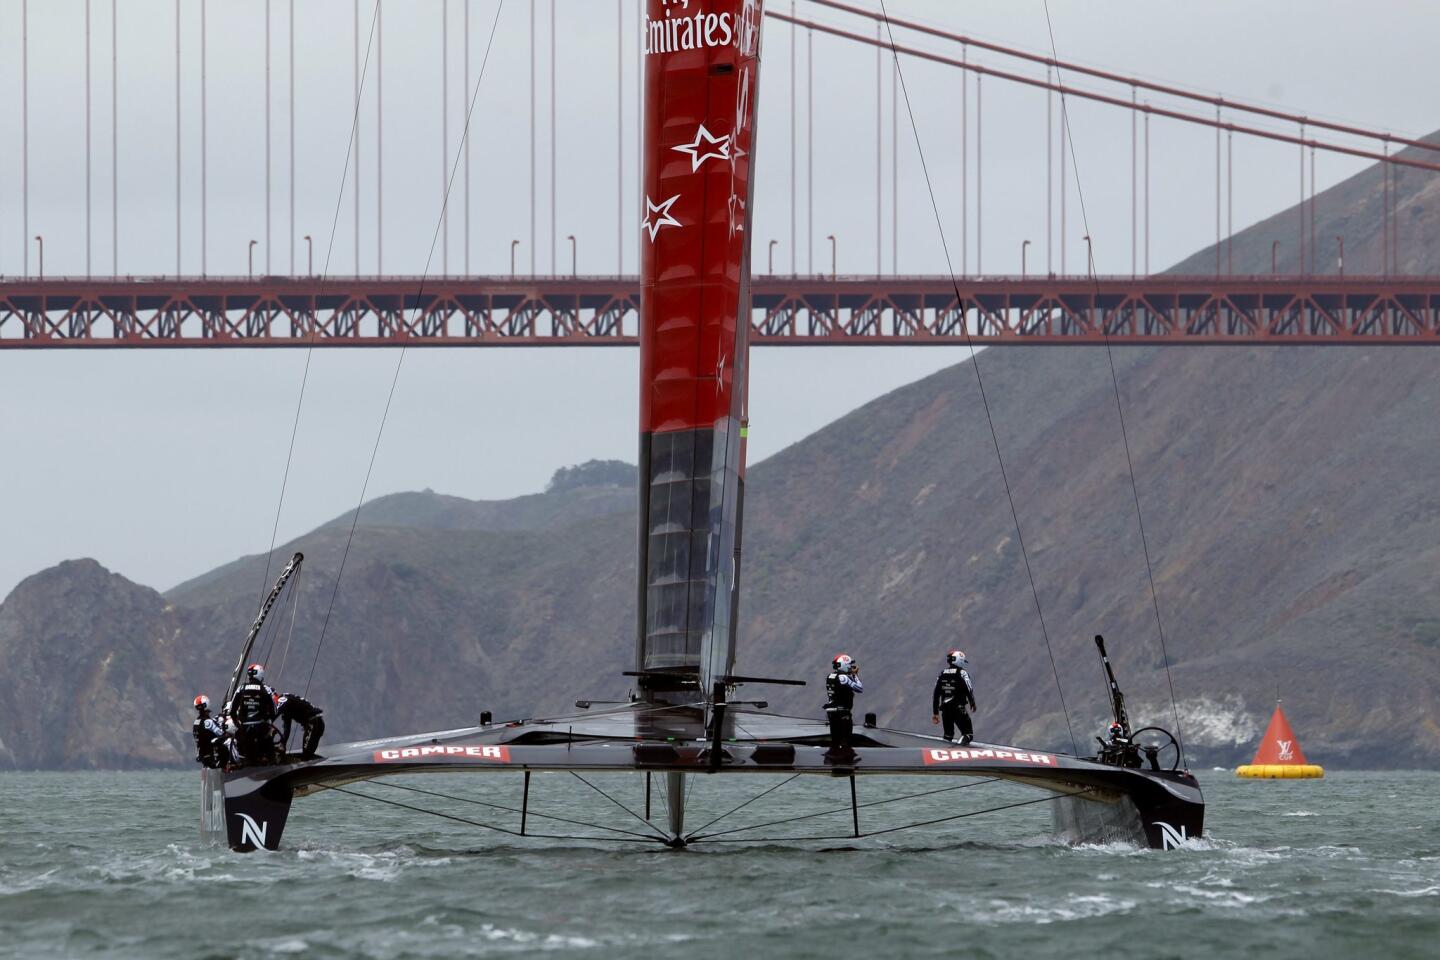 Emirates Team New Zealand sails toward the Golden Gate Bridge during the round robin one yacht races of the Luis Vuitton Cup challenger series in the 34th America's Cup in San Francisco